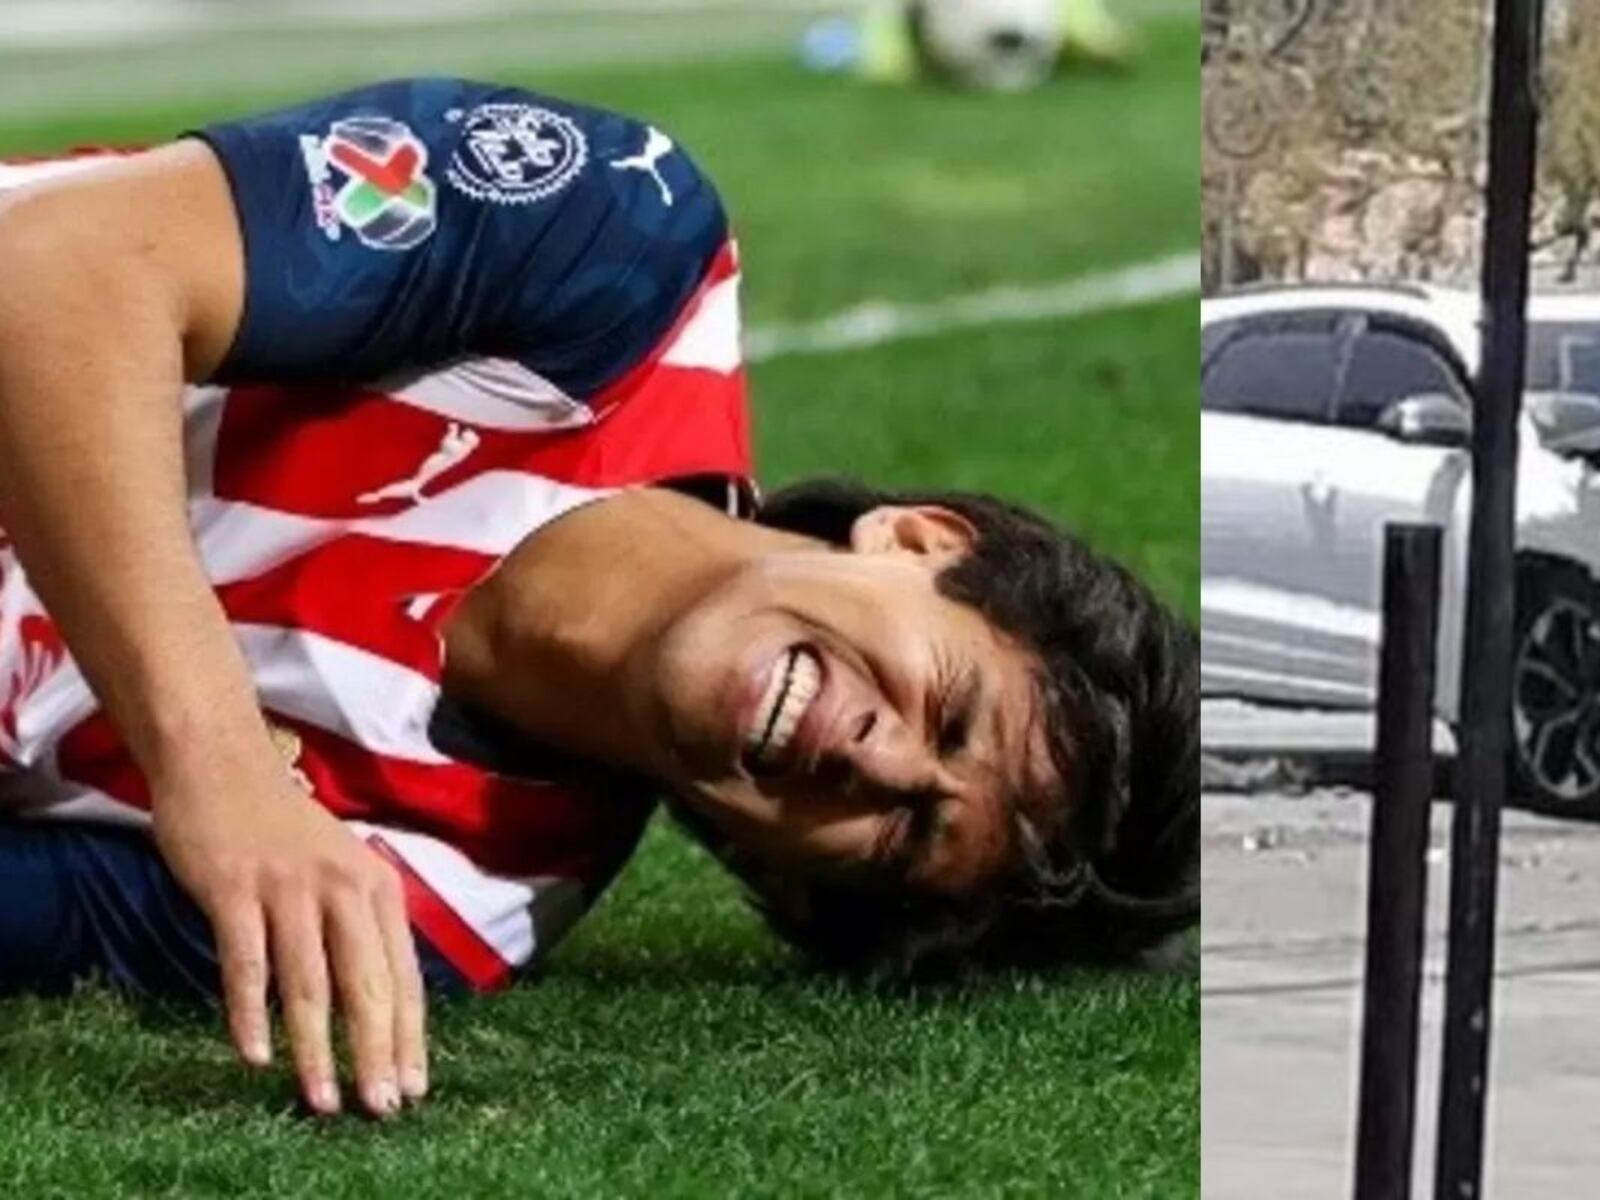 The three players who earn less in Chivas than the car that Macías crashed is worth